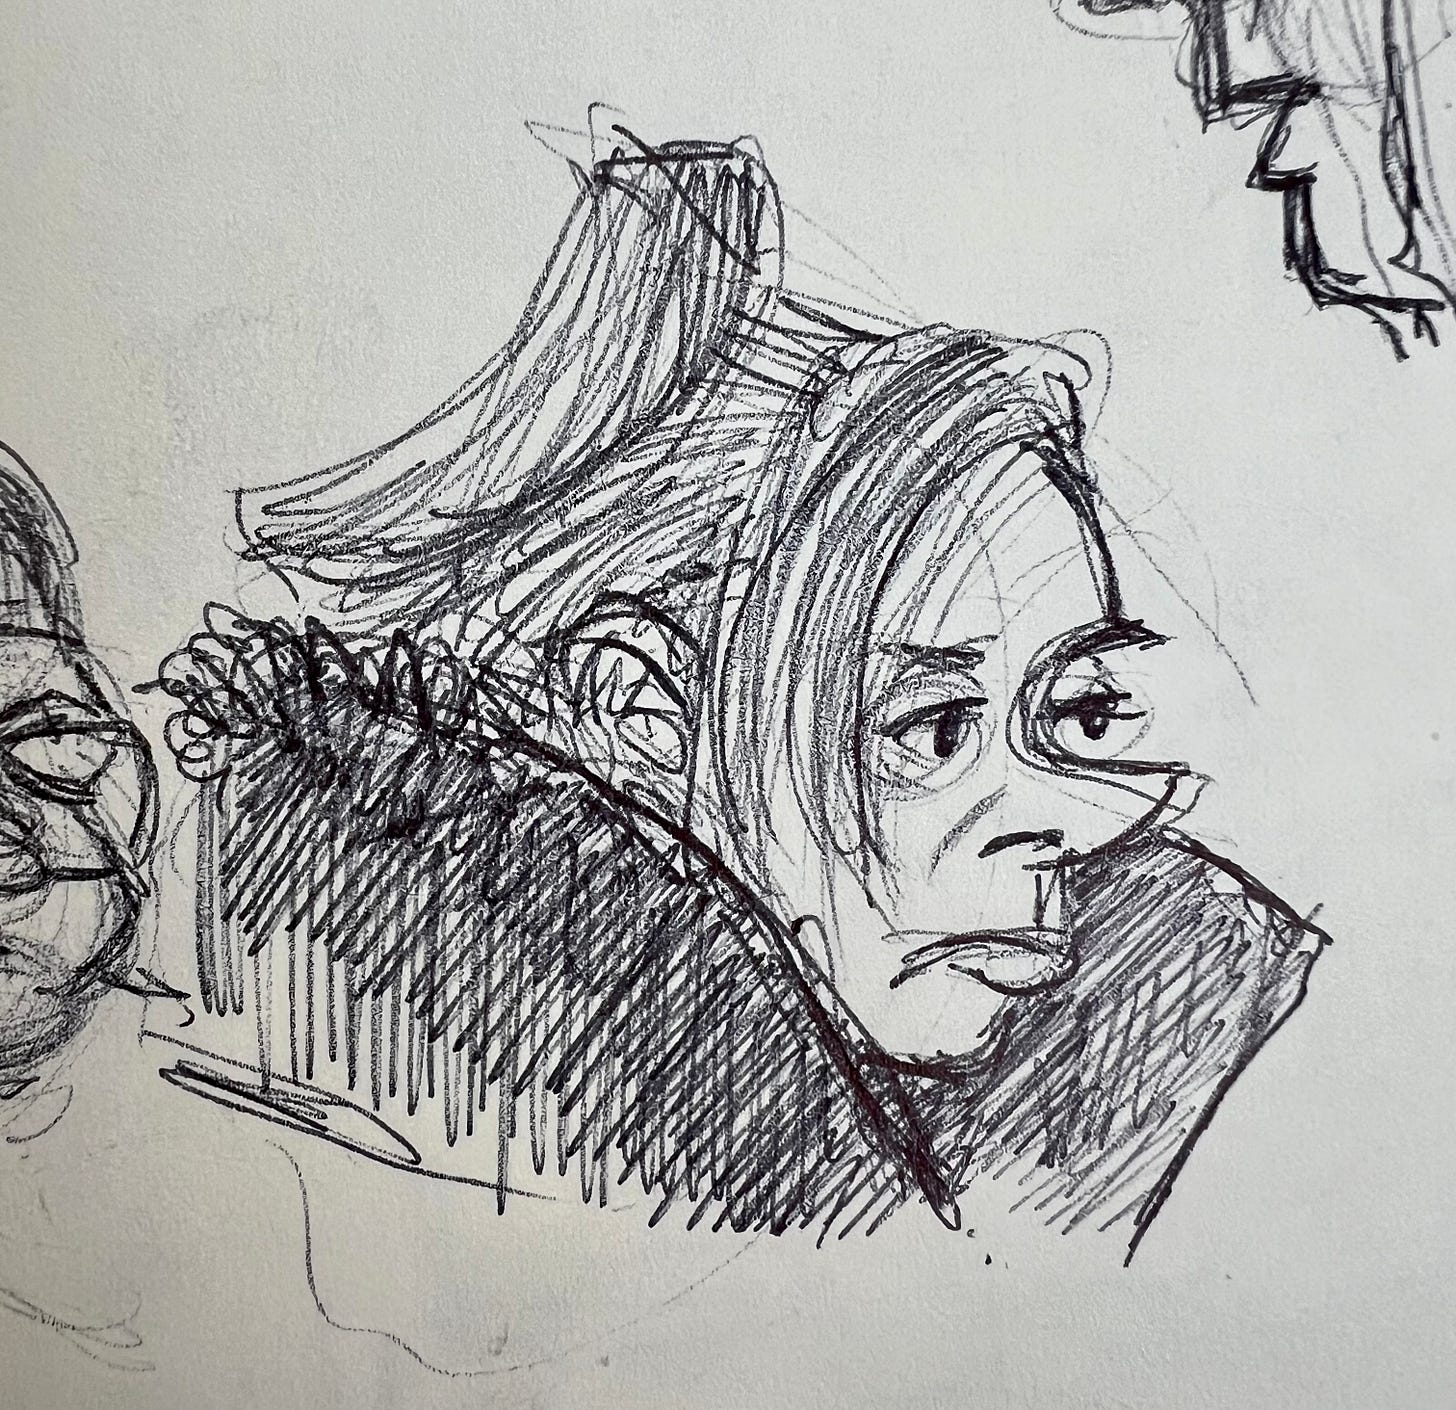 Quick thumbnail sketch of a woman looking extremely pissed off, but who was probably just thinking. 